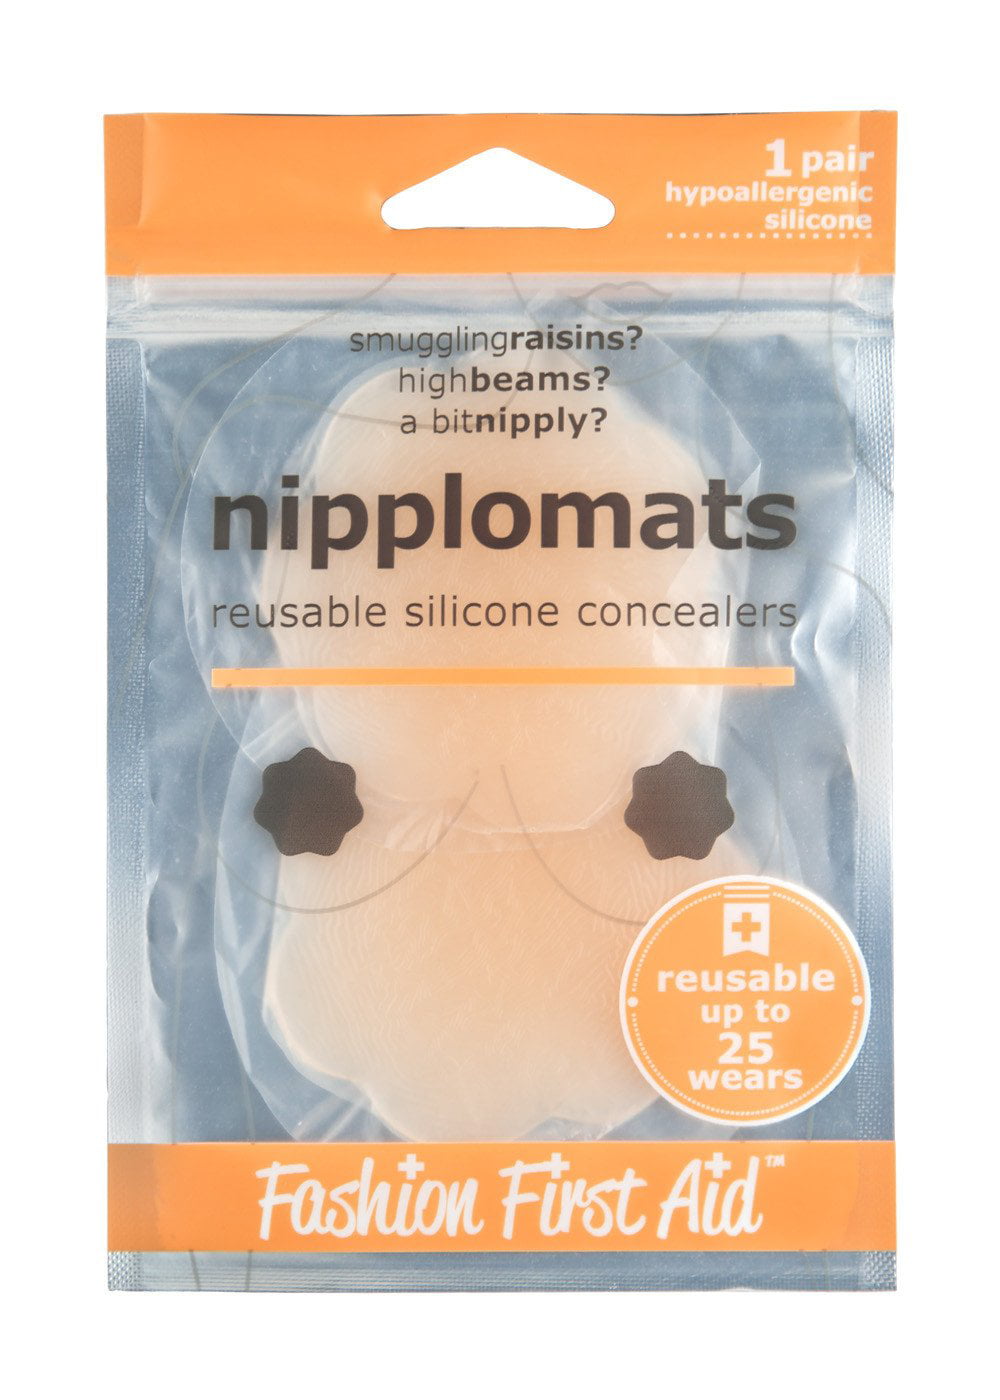 Fashion First Aid - Nipplomats: The Best Reusable Silicone Nipple ...